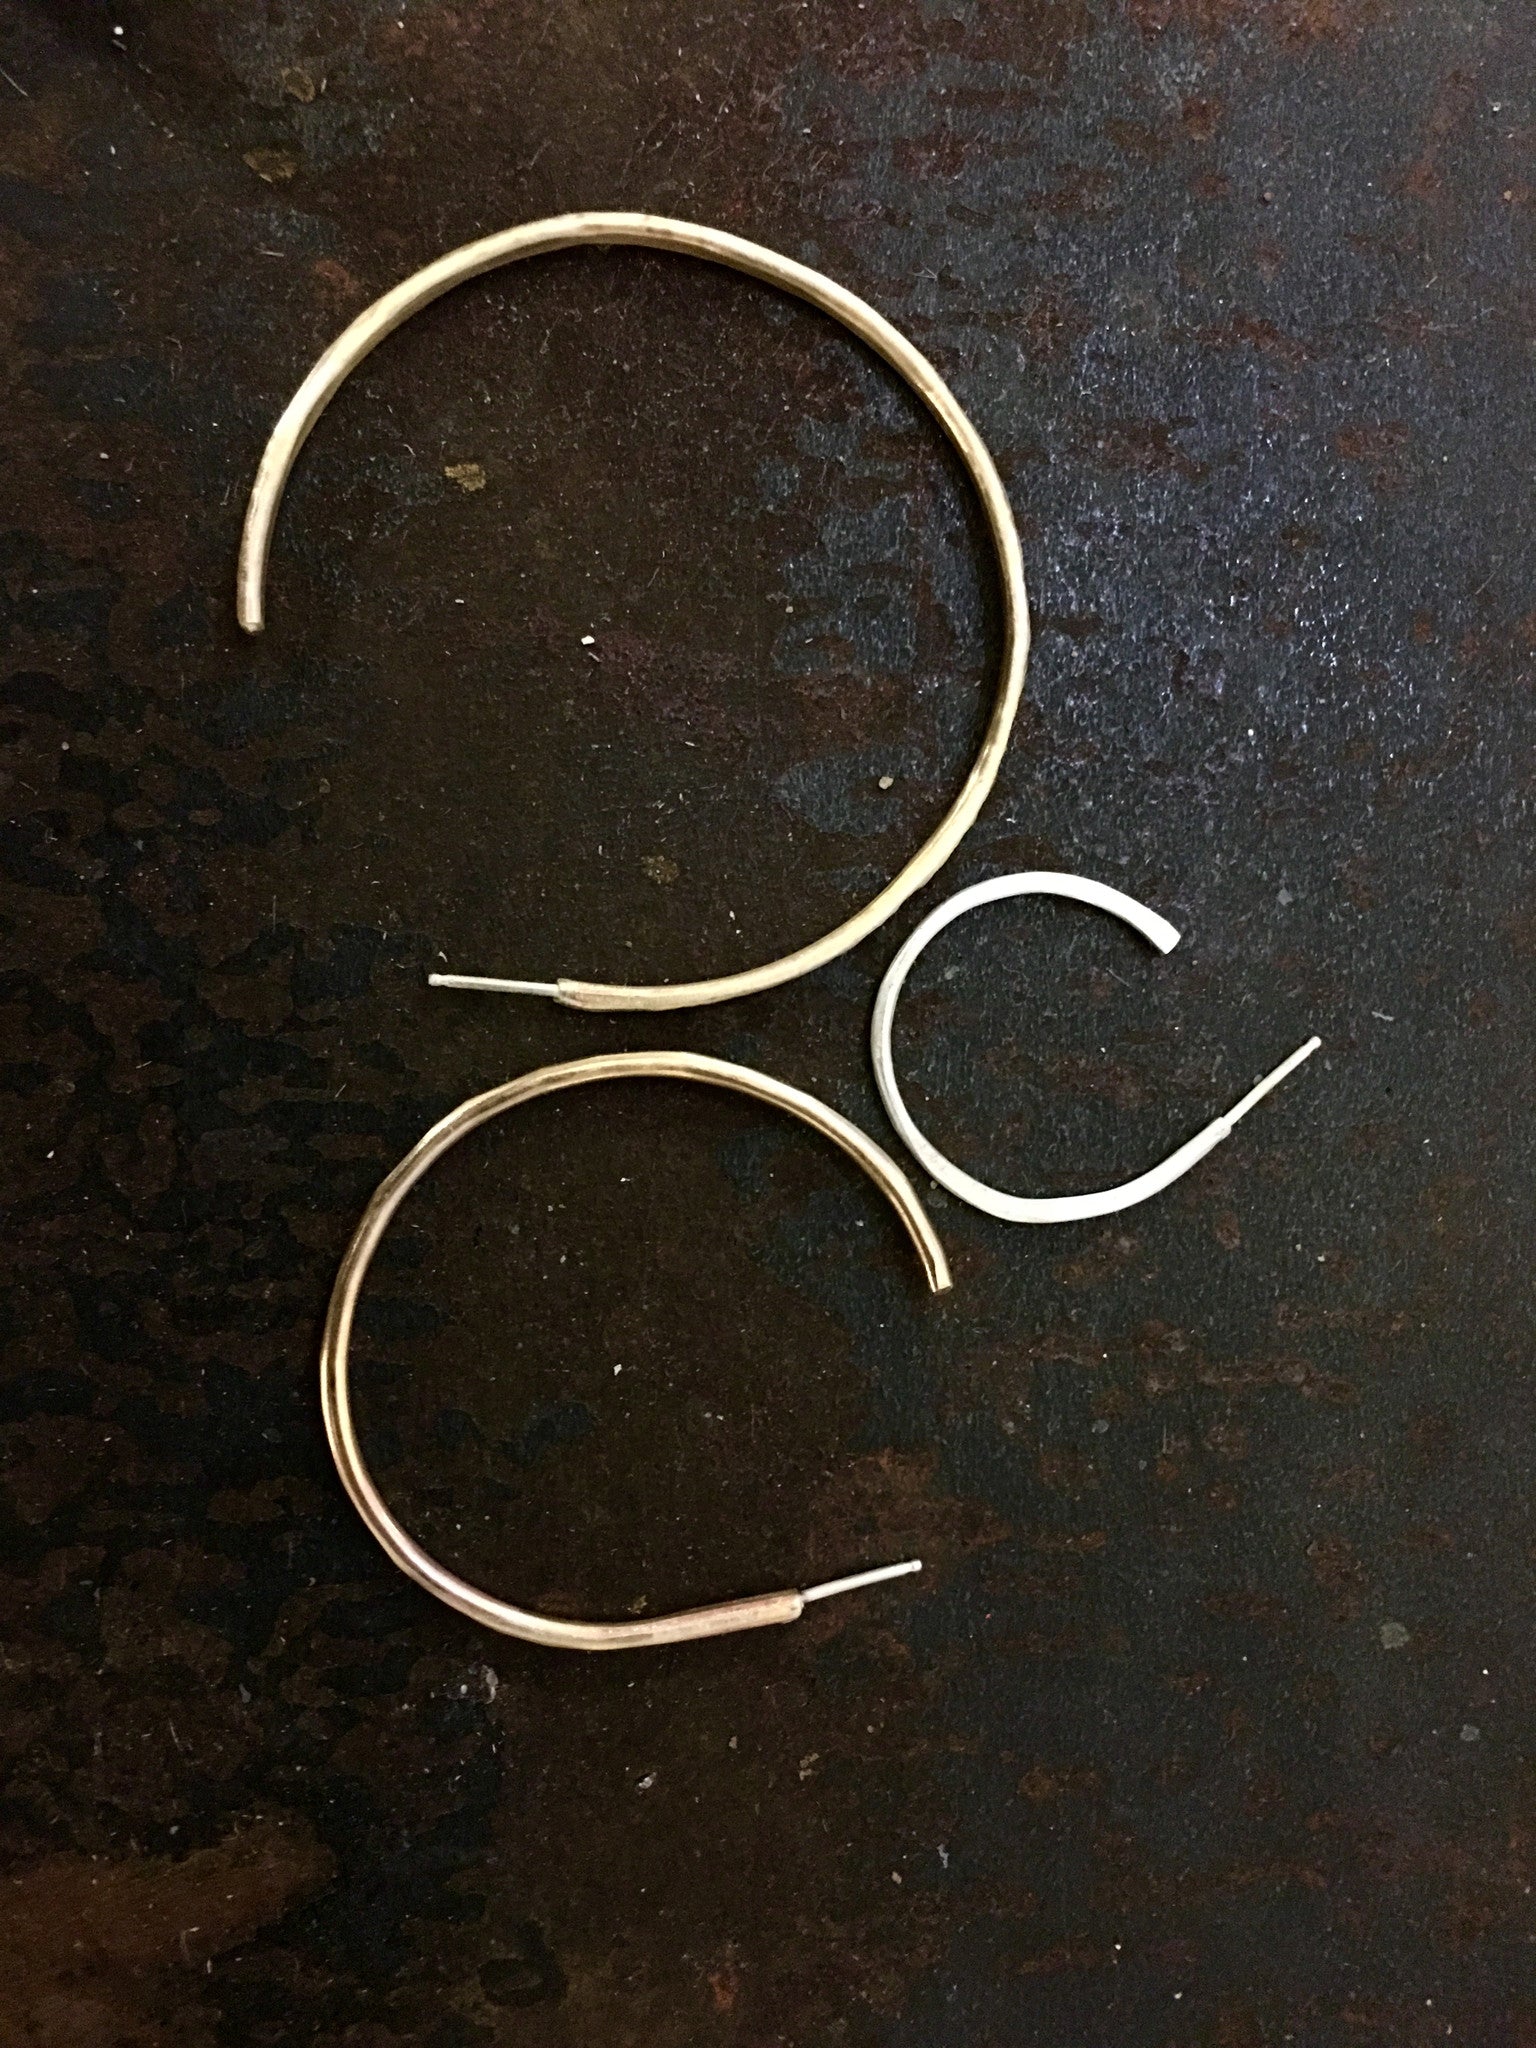 workshop / intro to working with metals + making HOOP or RIBBON EARRINGS